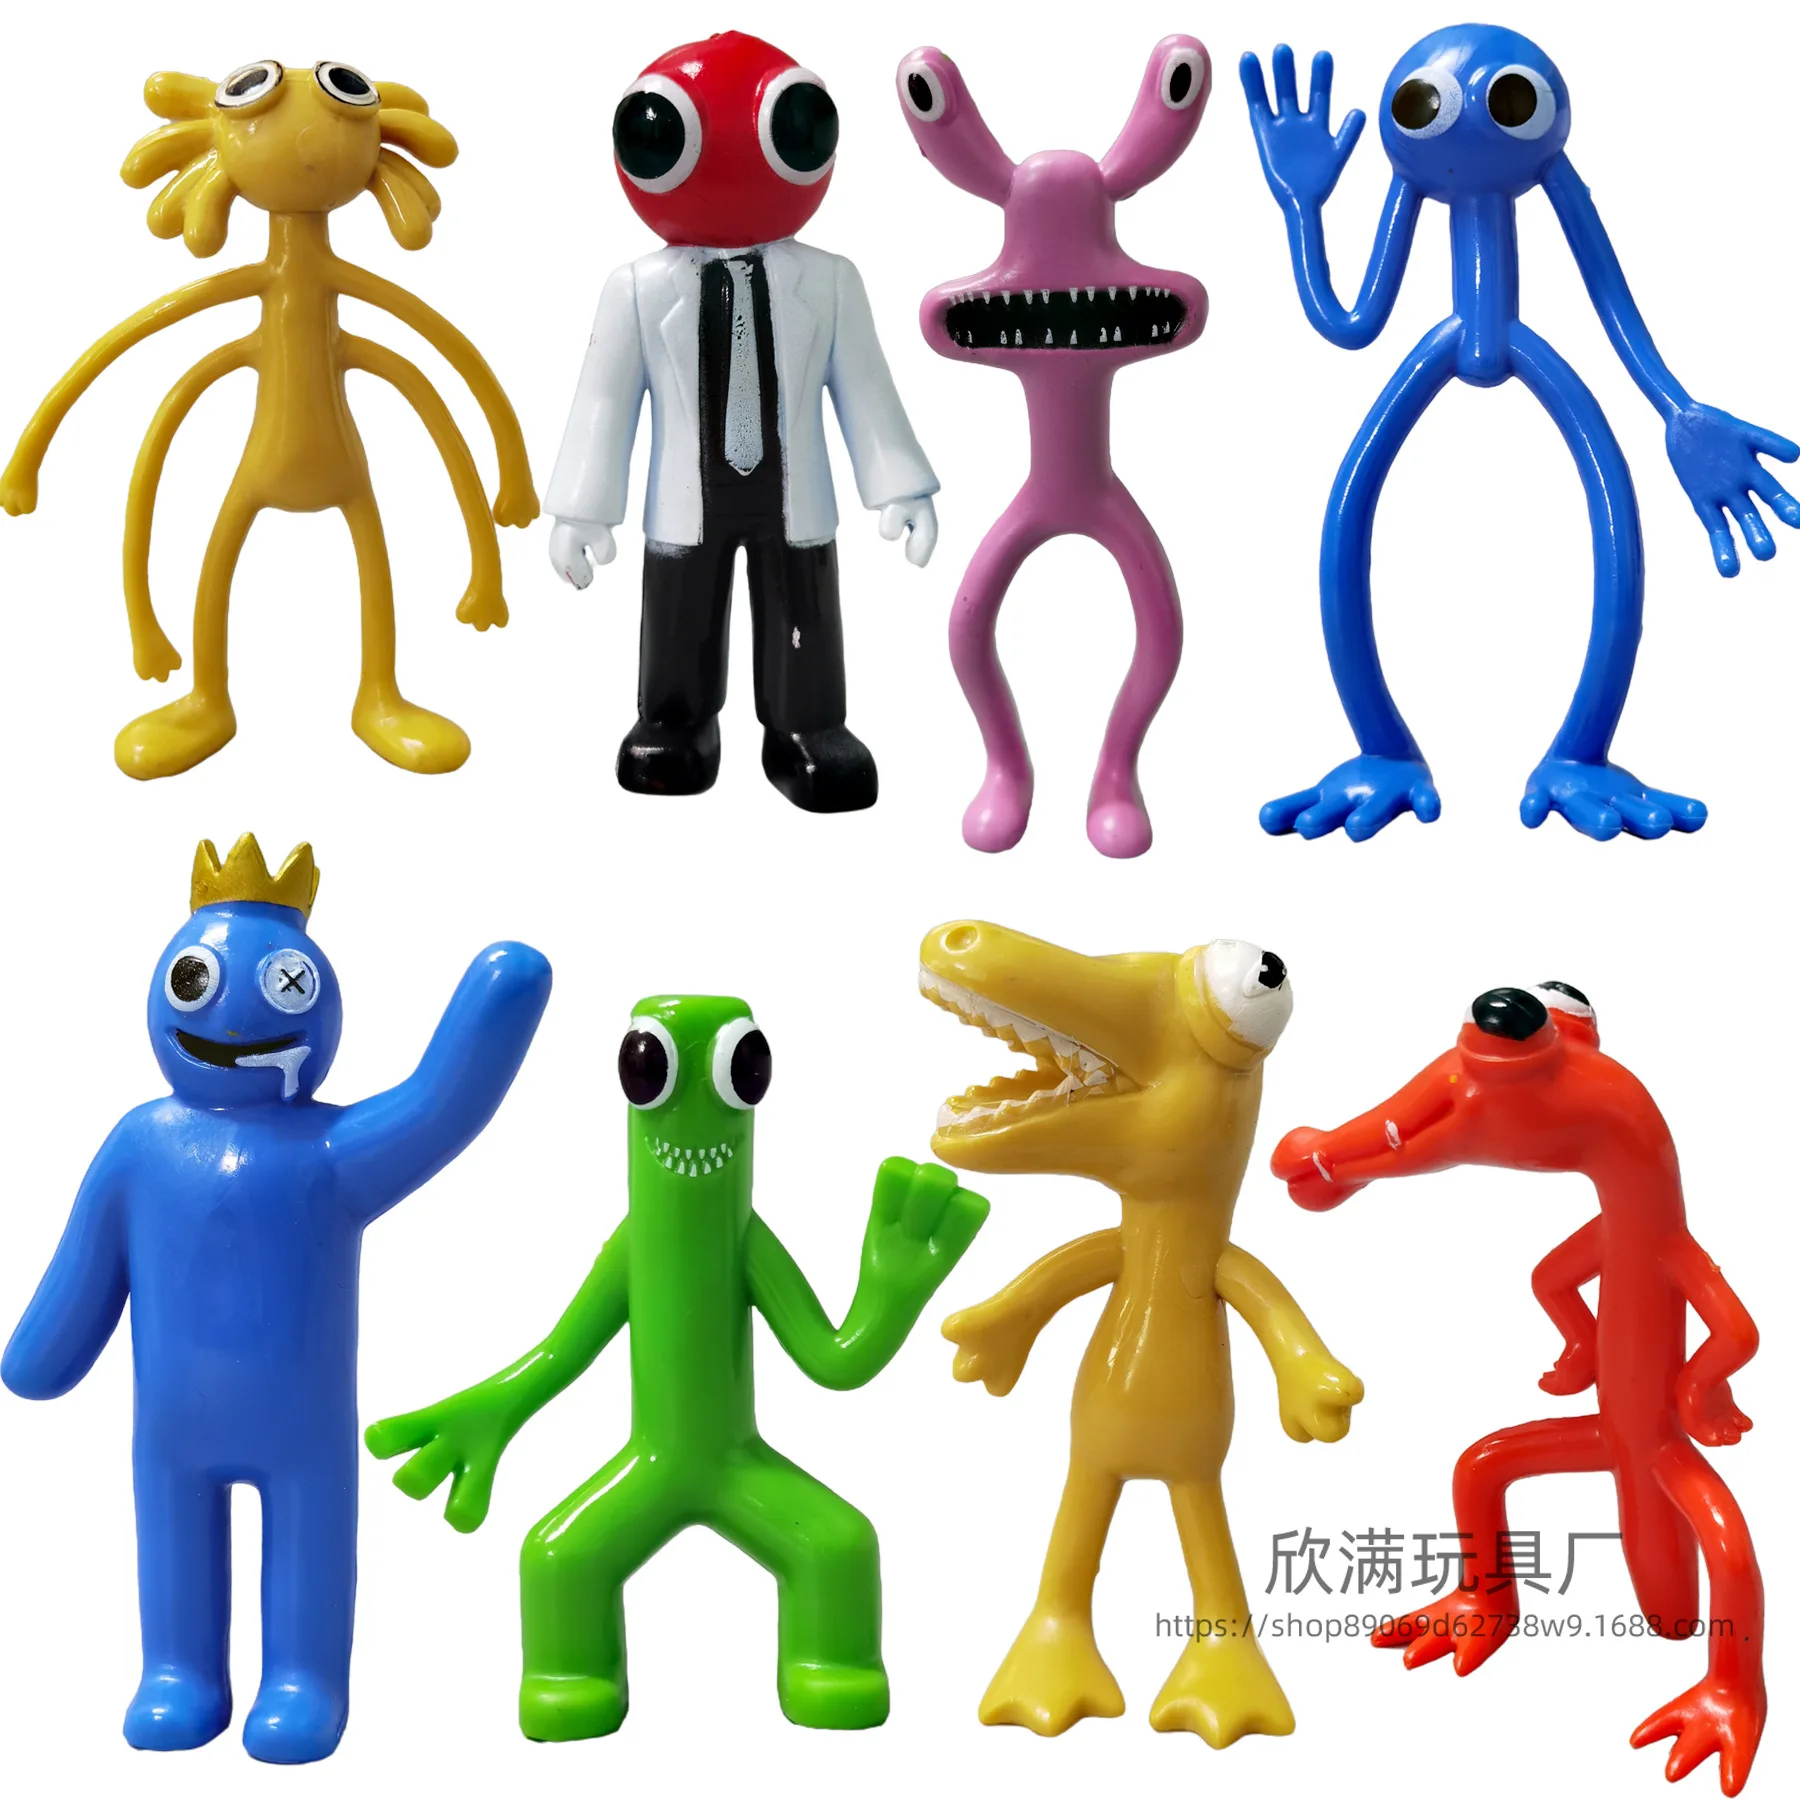 Zoopa 8pcs Roblox Rainbow Friends Action Figure Toy Model